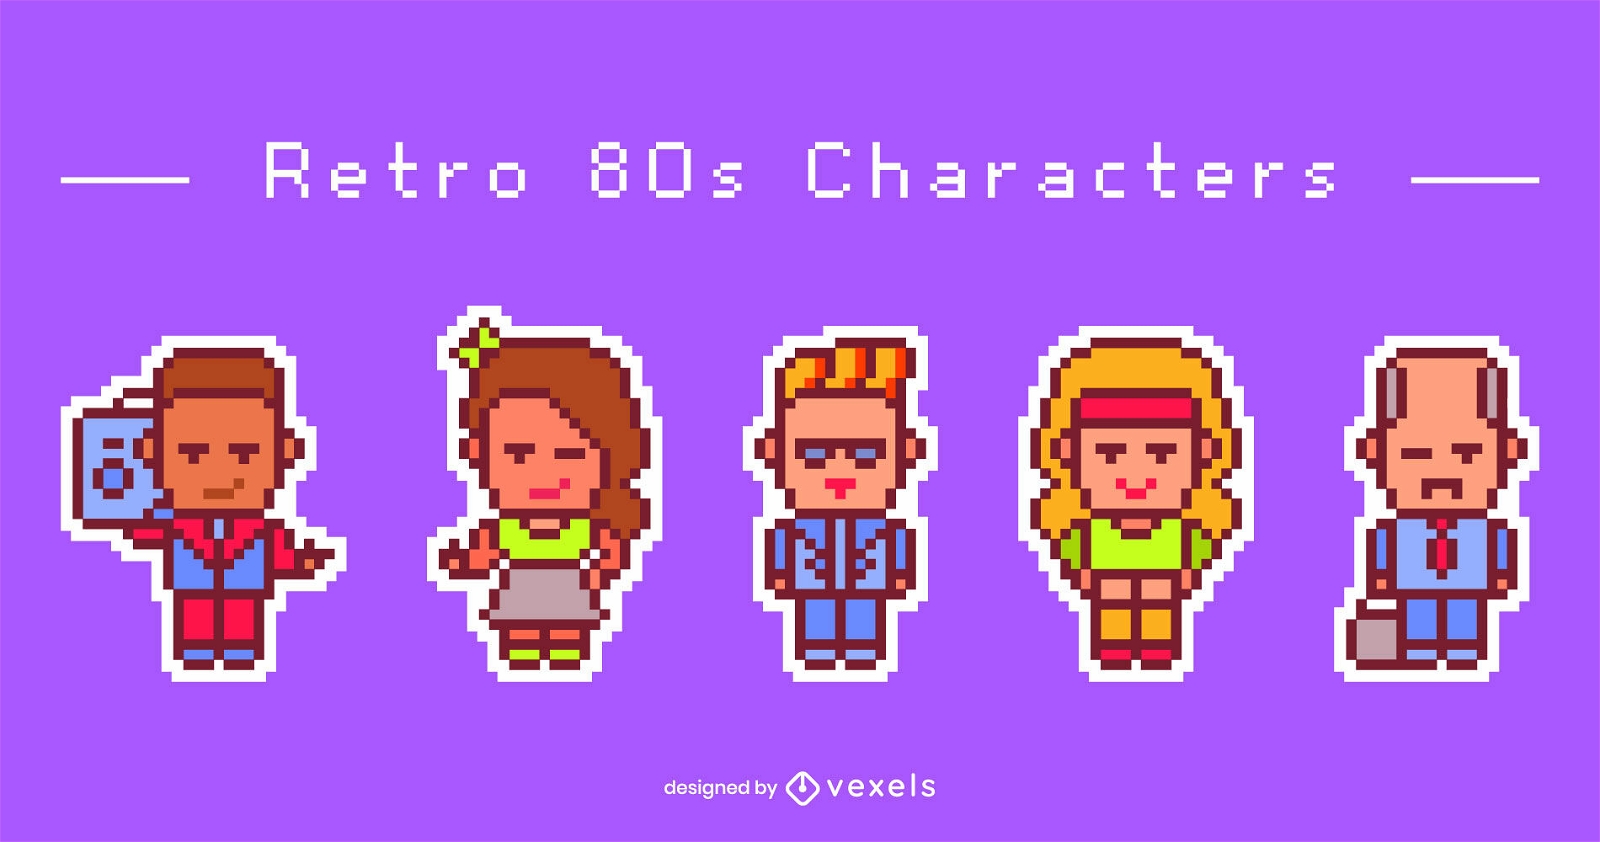 characters from the 80s